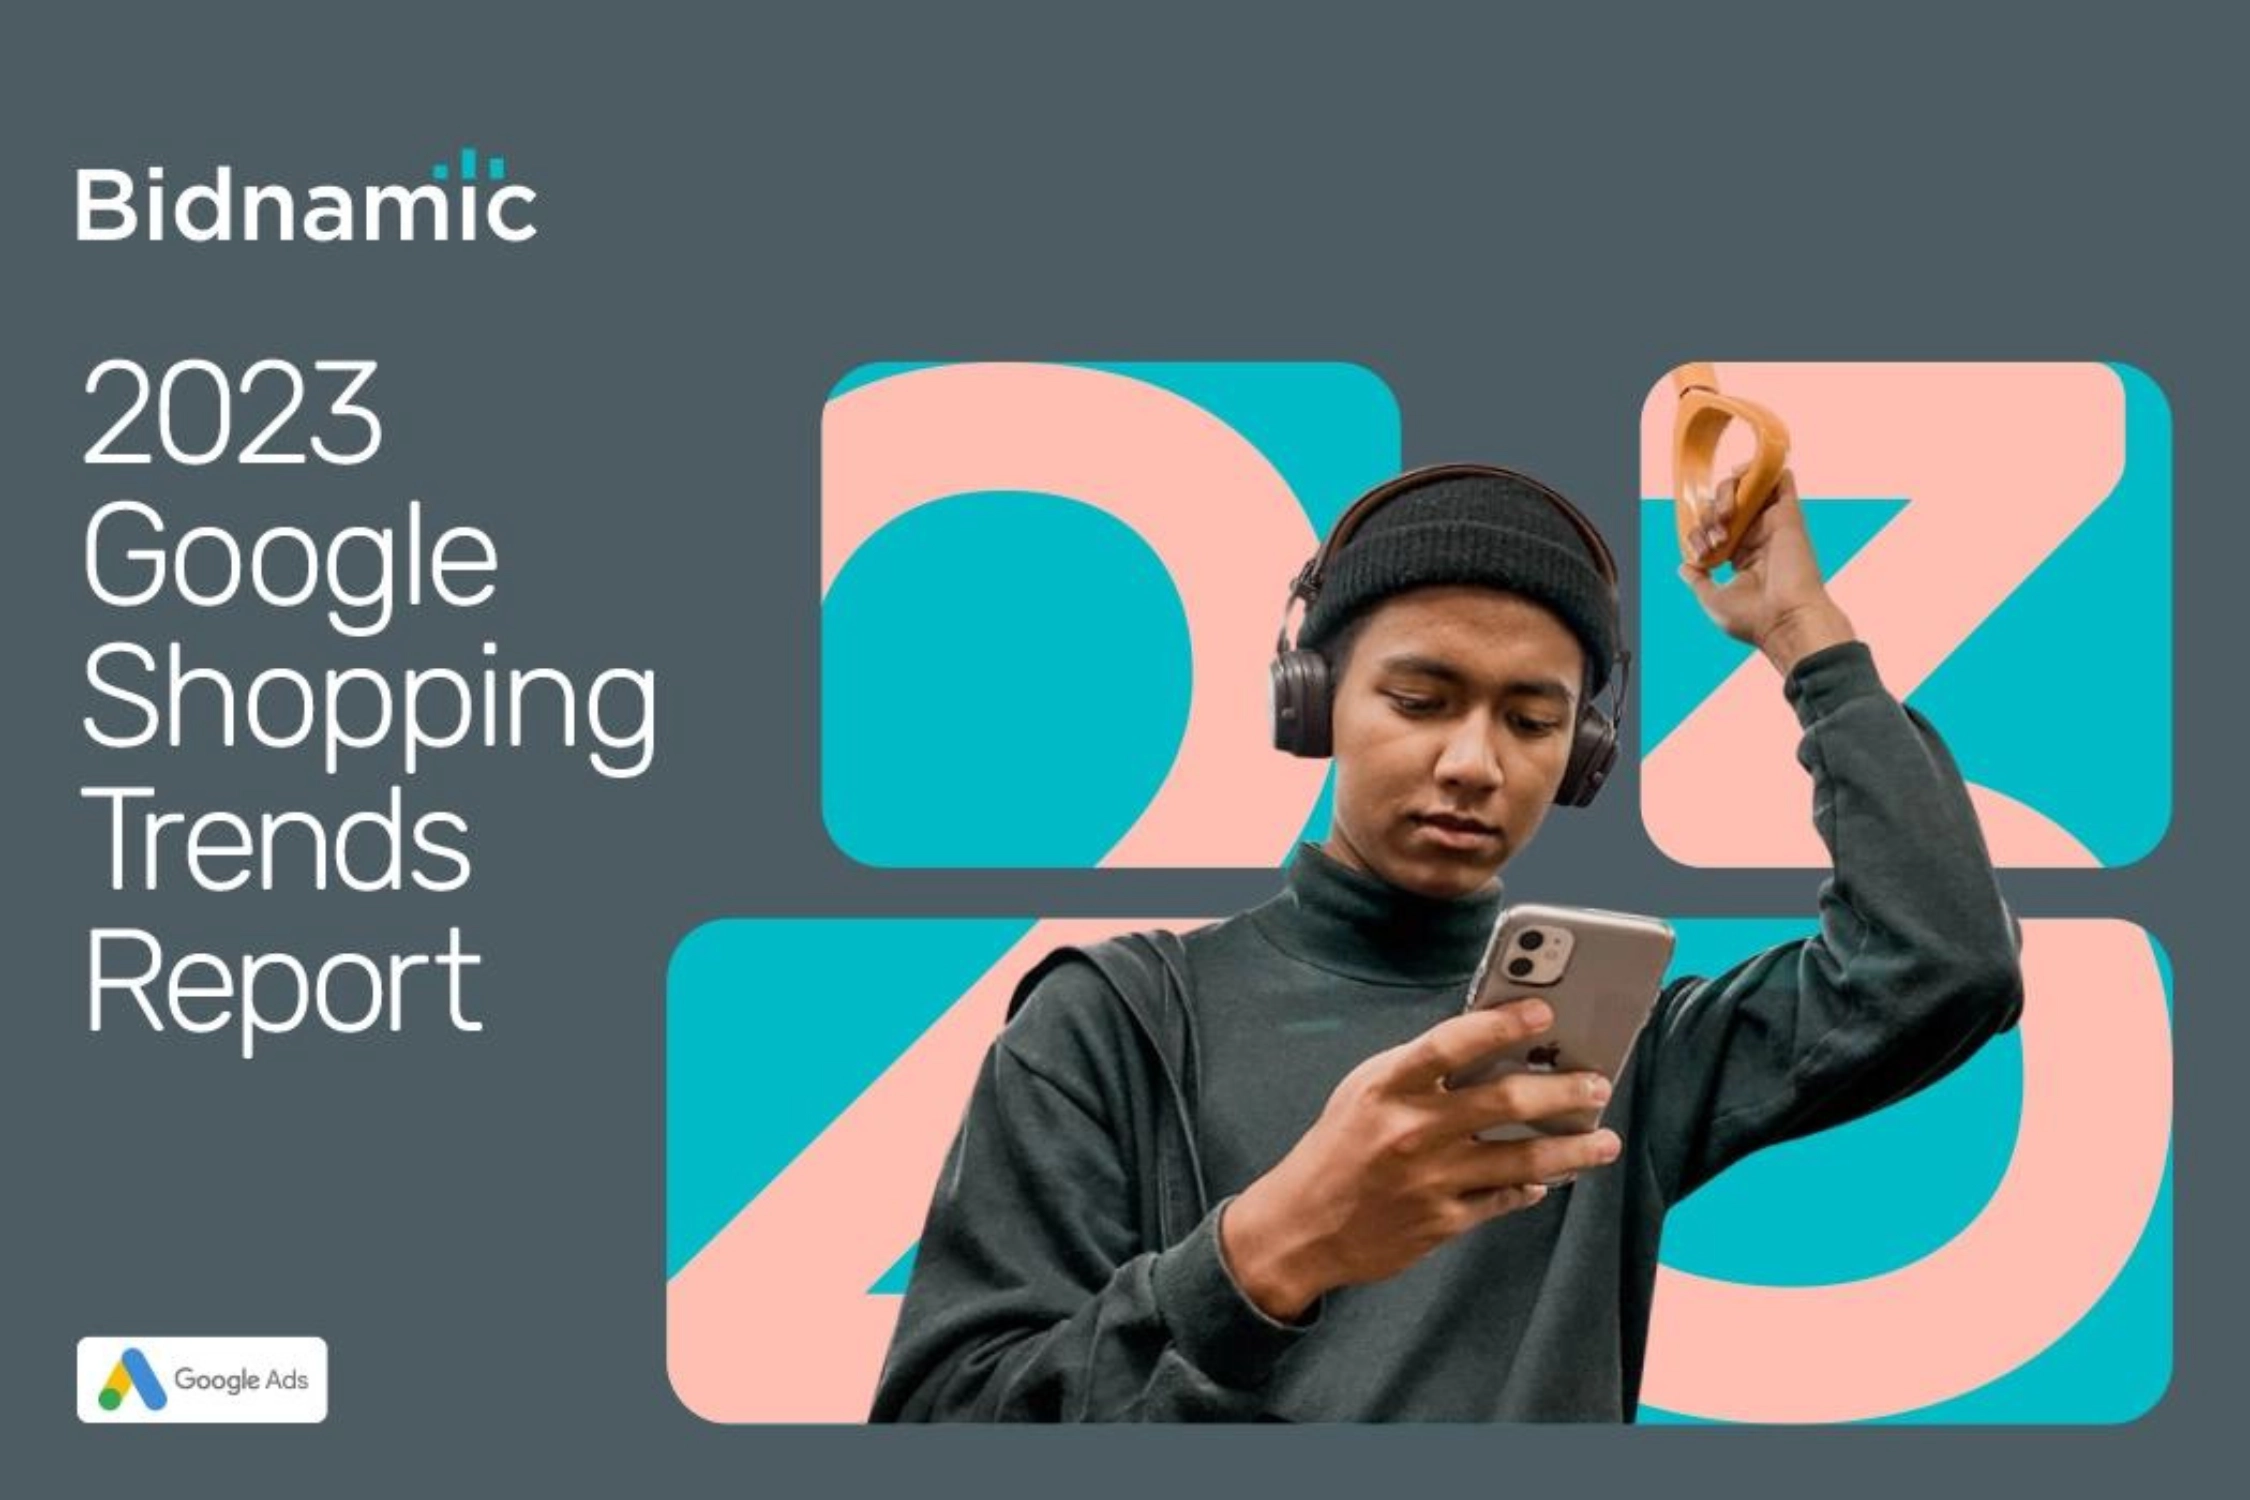 2023 Google Shopping Trends Report